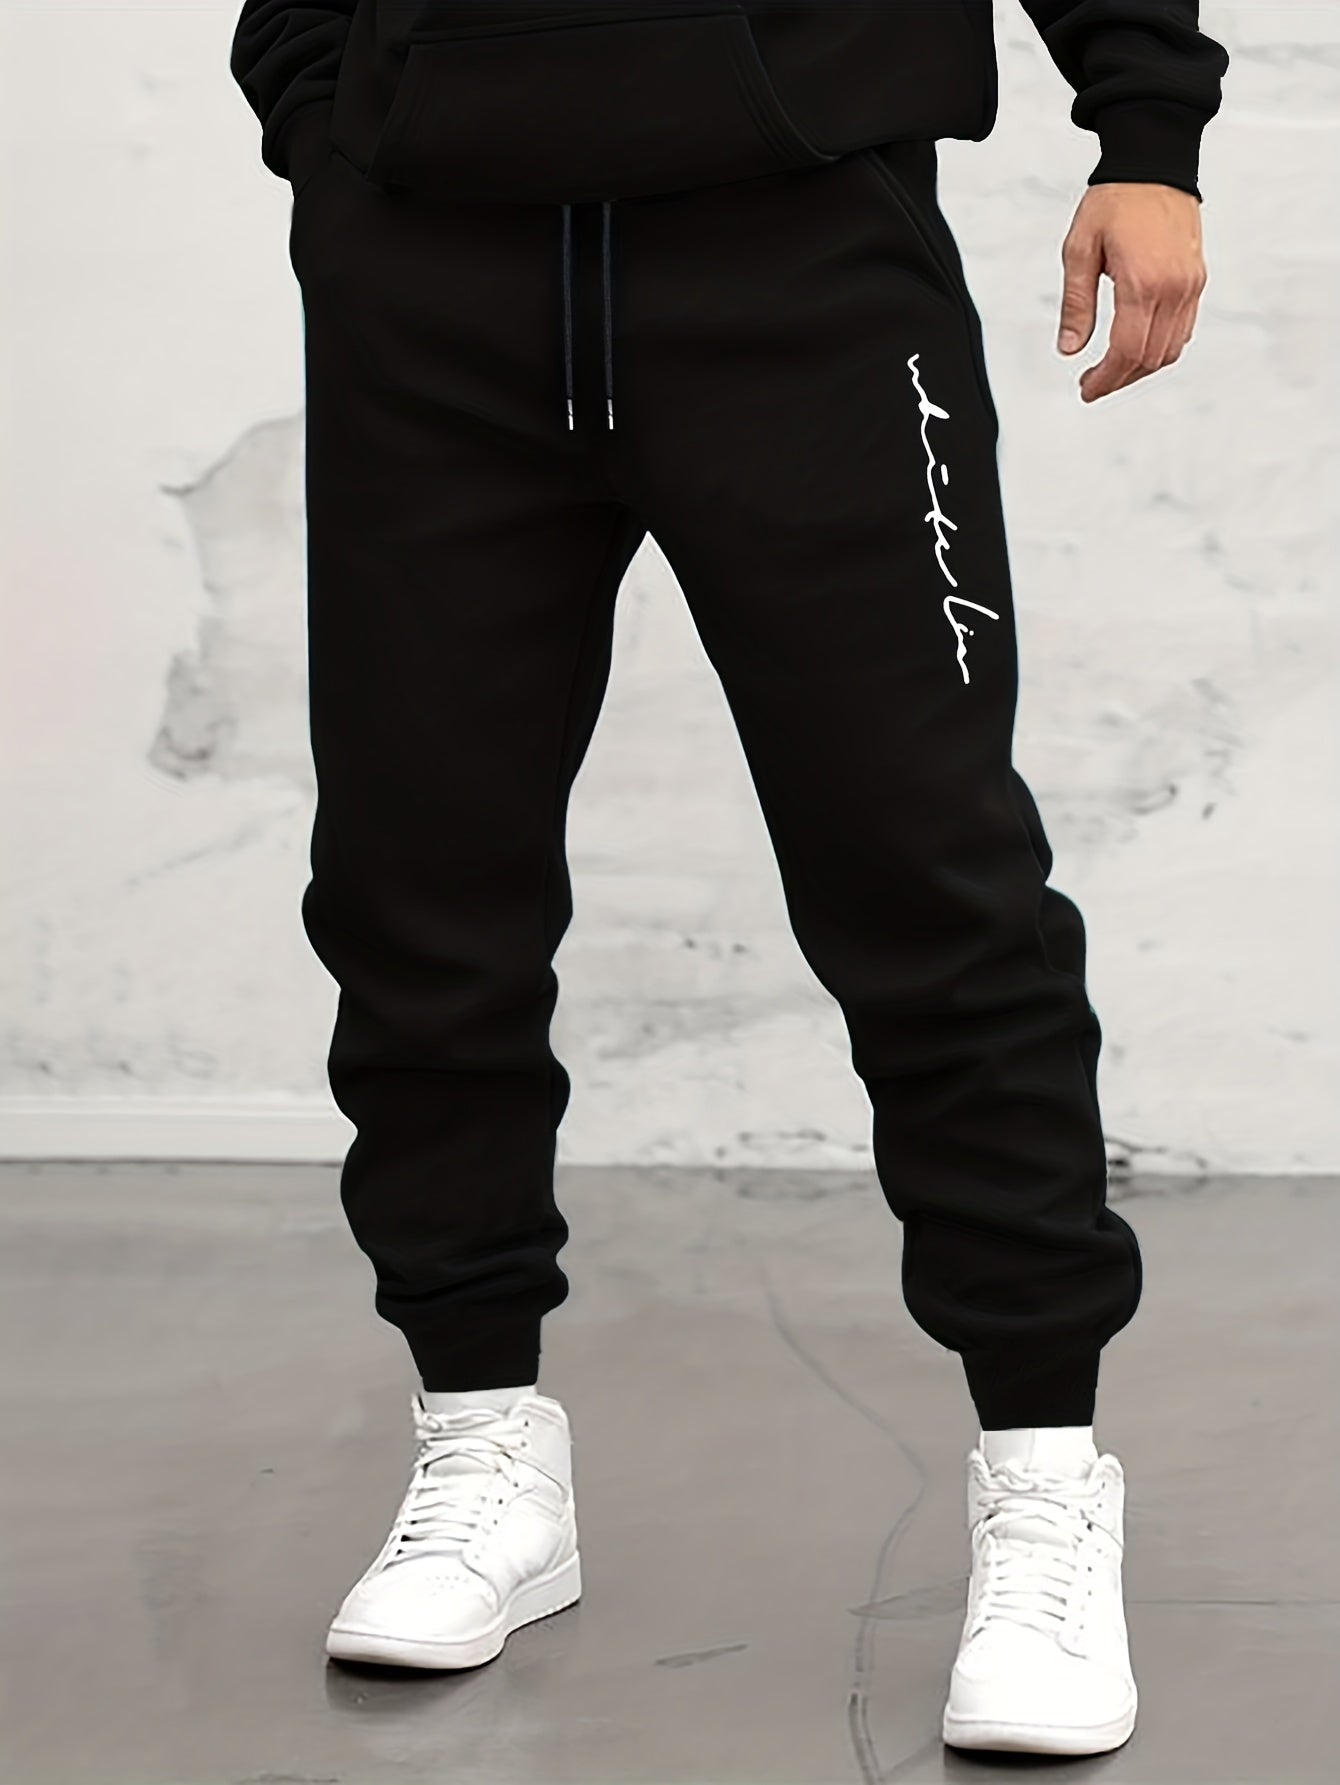 Letter Print Drawstring Sweatpants Loose Fit Pants Men's Casual Slightly Stretch Joggers For Spring Autumn Running Jogging